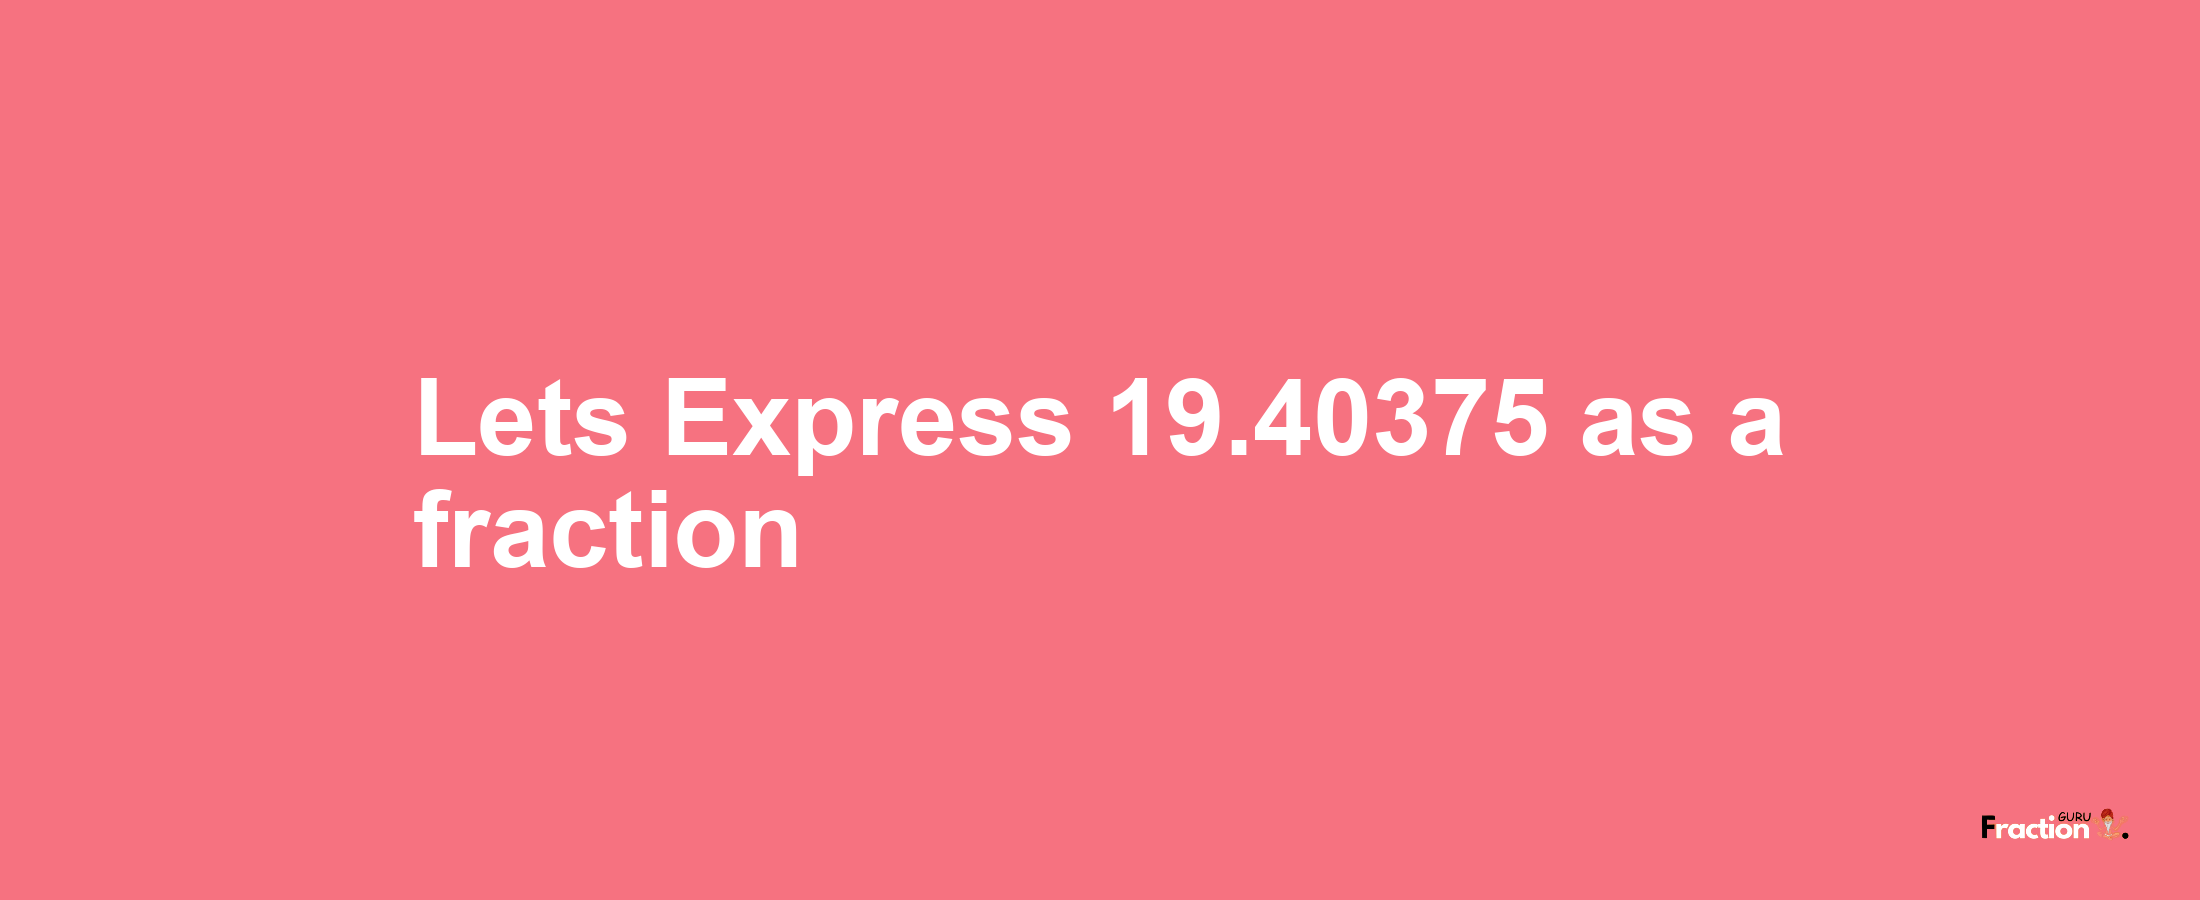 Lets Express 19.40375 as afraction